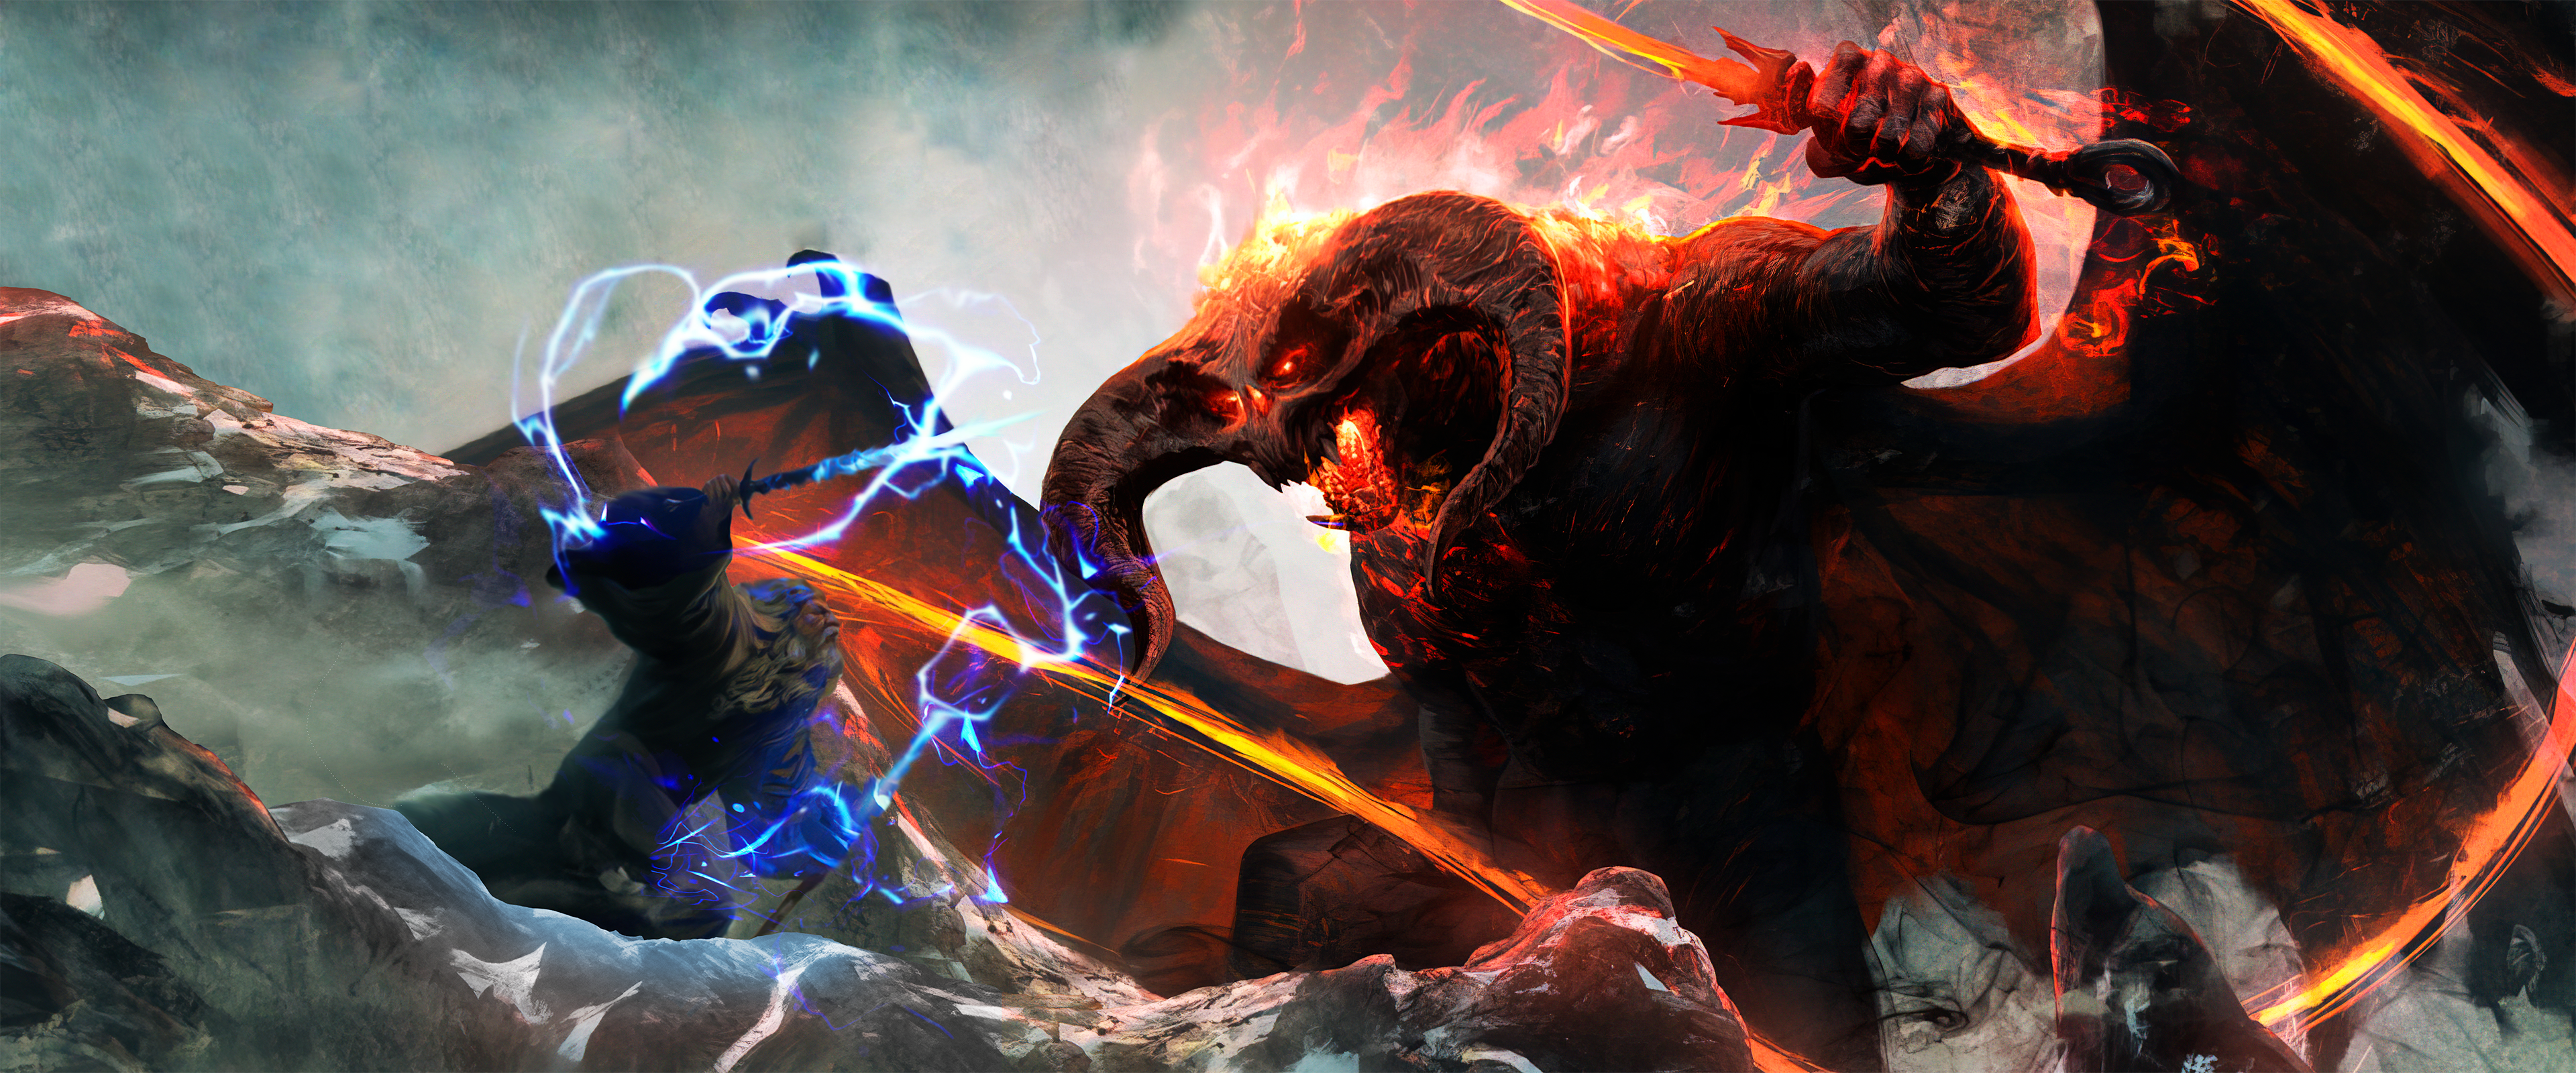 Gandalf Balrog The Lord Of The Rings 3840x1600